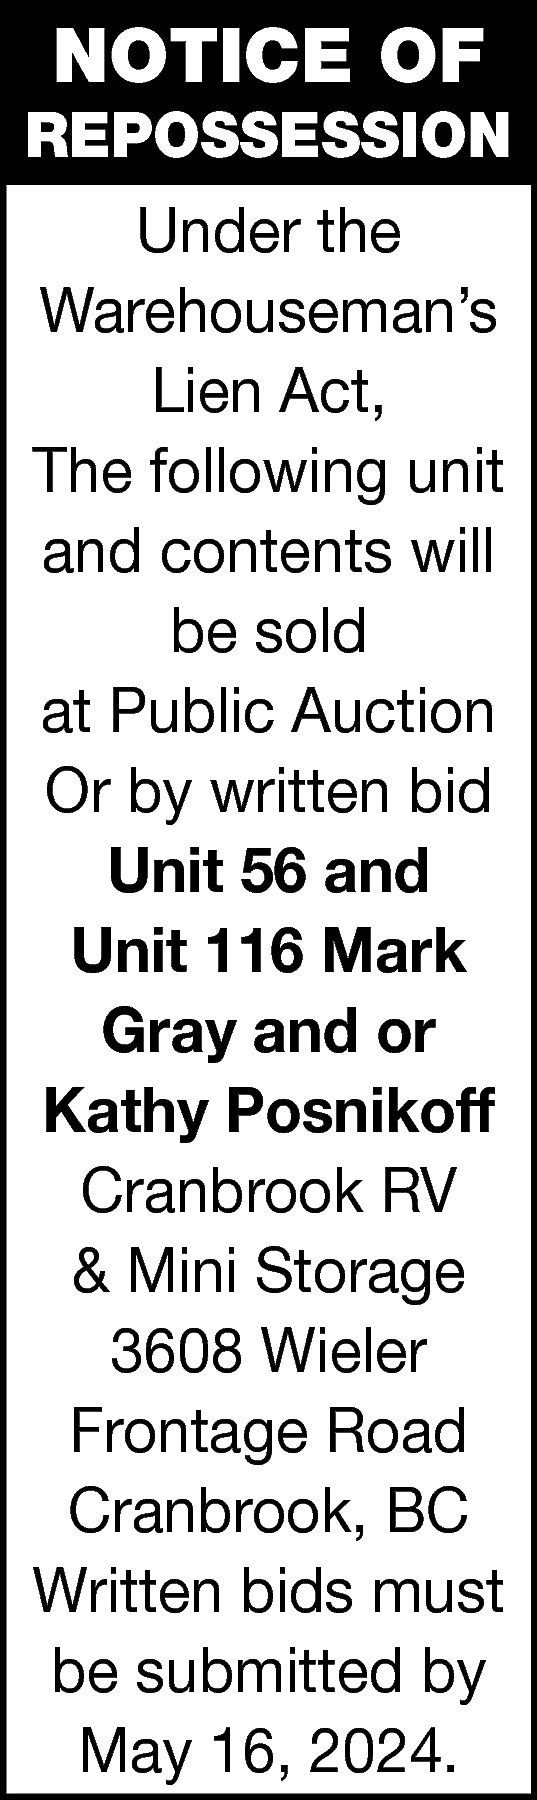 NOTICE OF <br> <br>REPOSSESSION <br>Under  NOTICE OF    REPOSSESSION  Under the  Warehouseman’s  Lien Act,  The following unit  and contents will  be sold  at Public Auction  Or by written bid  Unit 56 and  Unit 116 Mark  Gray and or  Kathy Posnikoff  Cranbrook RV  & Mini Storage  3608 Wieler  Frontage Road  Cranbrook, BC  Written bids must  be submitted by  May 16, 2024.    